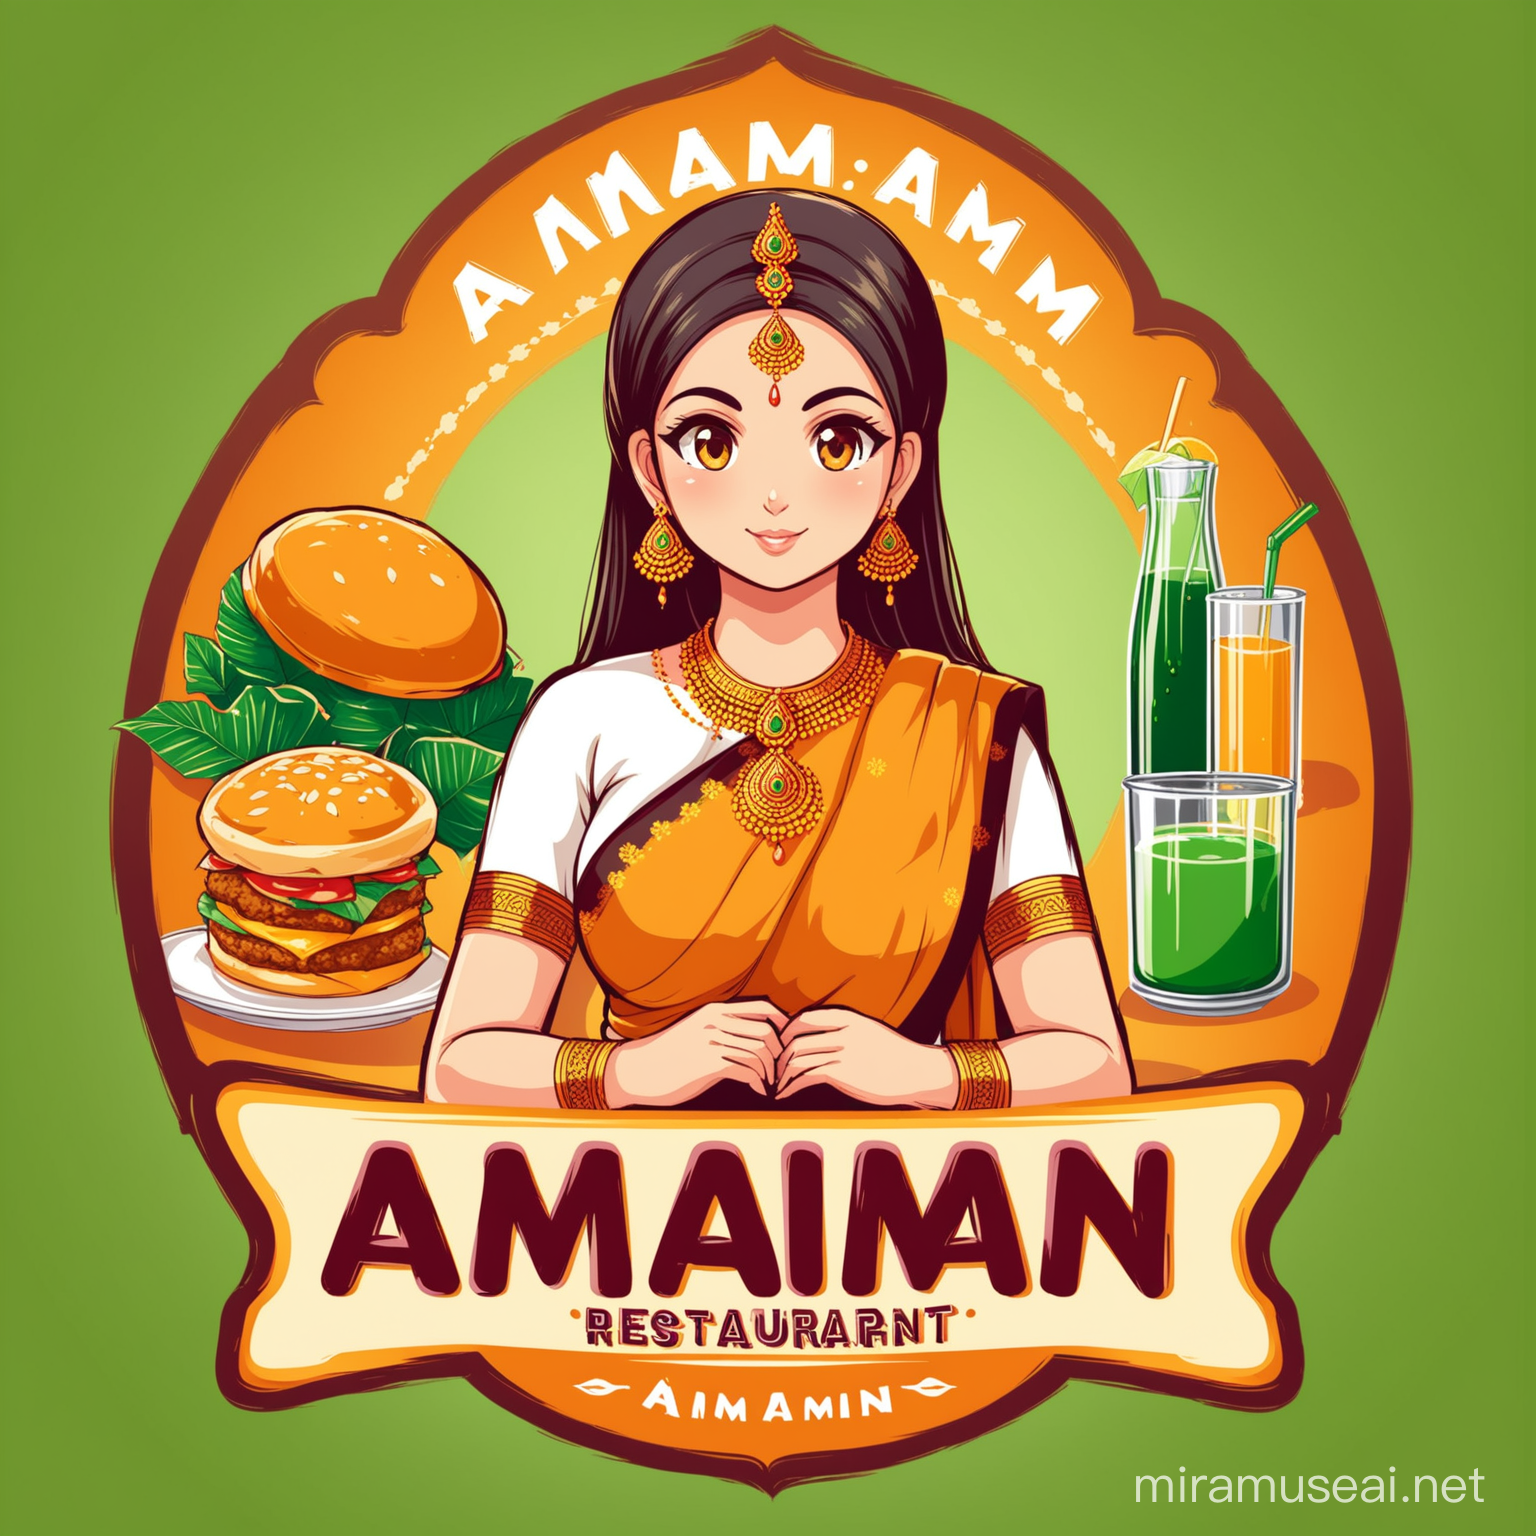 AMMAM Traditional and Modern Food with Nostalgic Flair